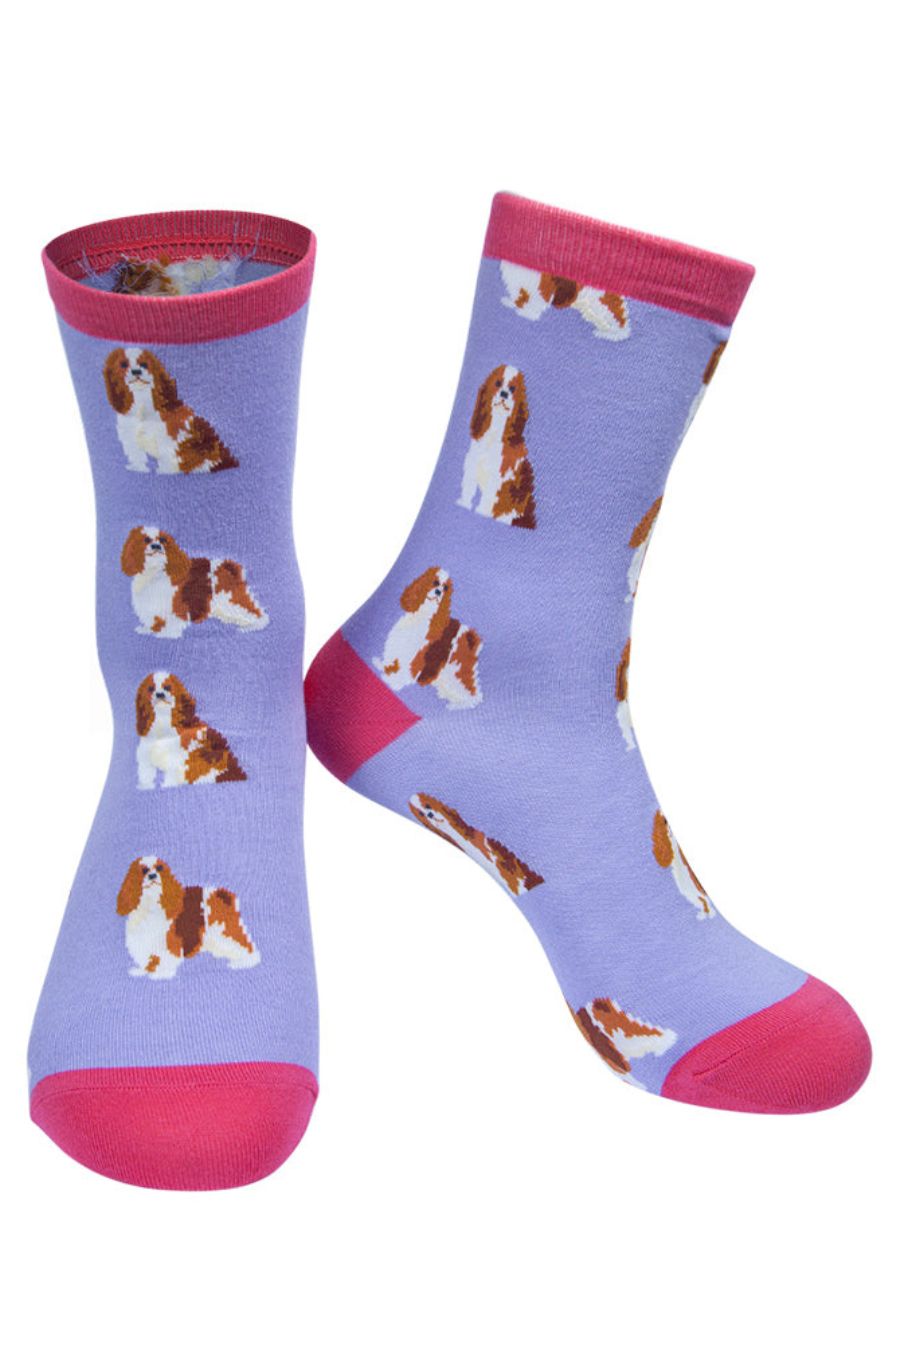 lilac and hot pink women's bamboo ankle socks with an all over pattern of king charles spaniels